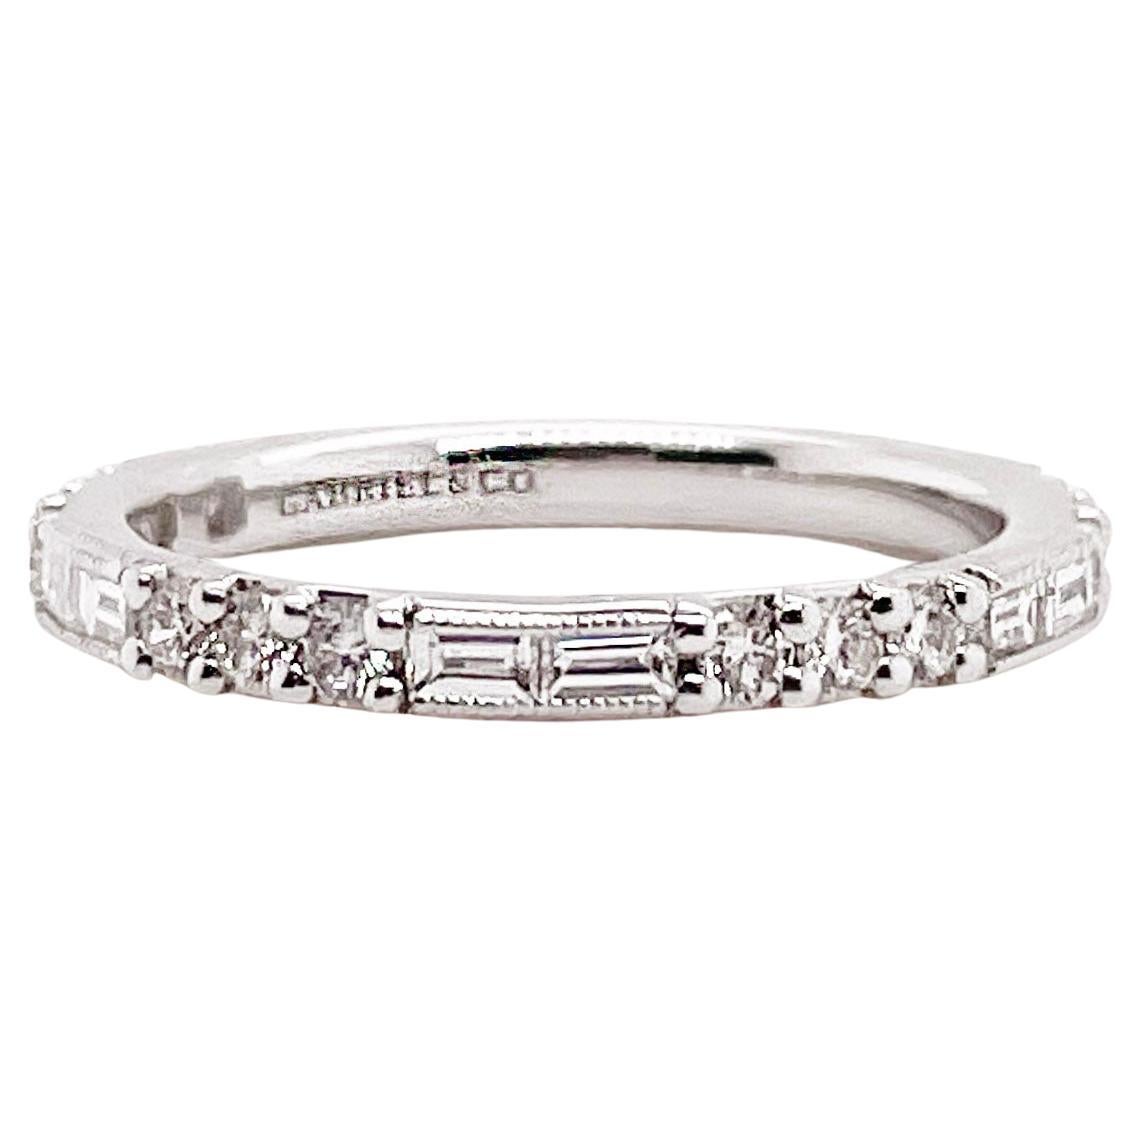 For Sale:  Baguette Diamond Band Stackable Ring, White Gold, Alternating Round & Baguette